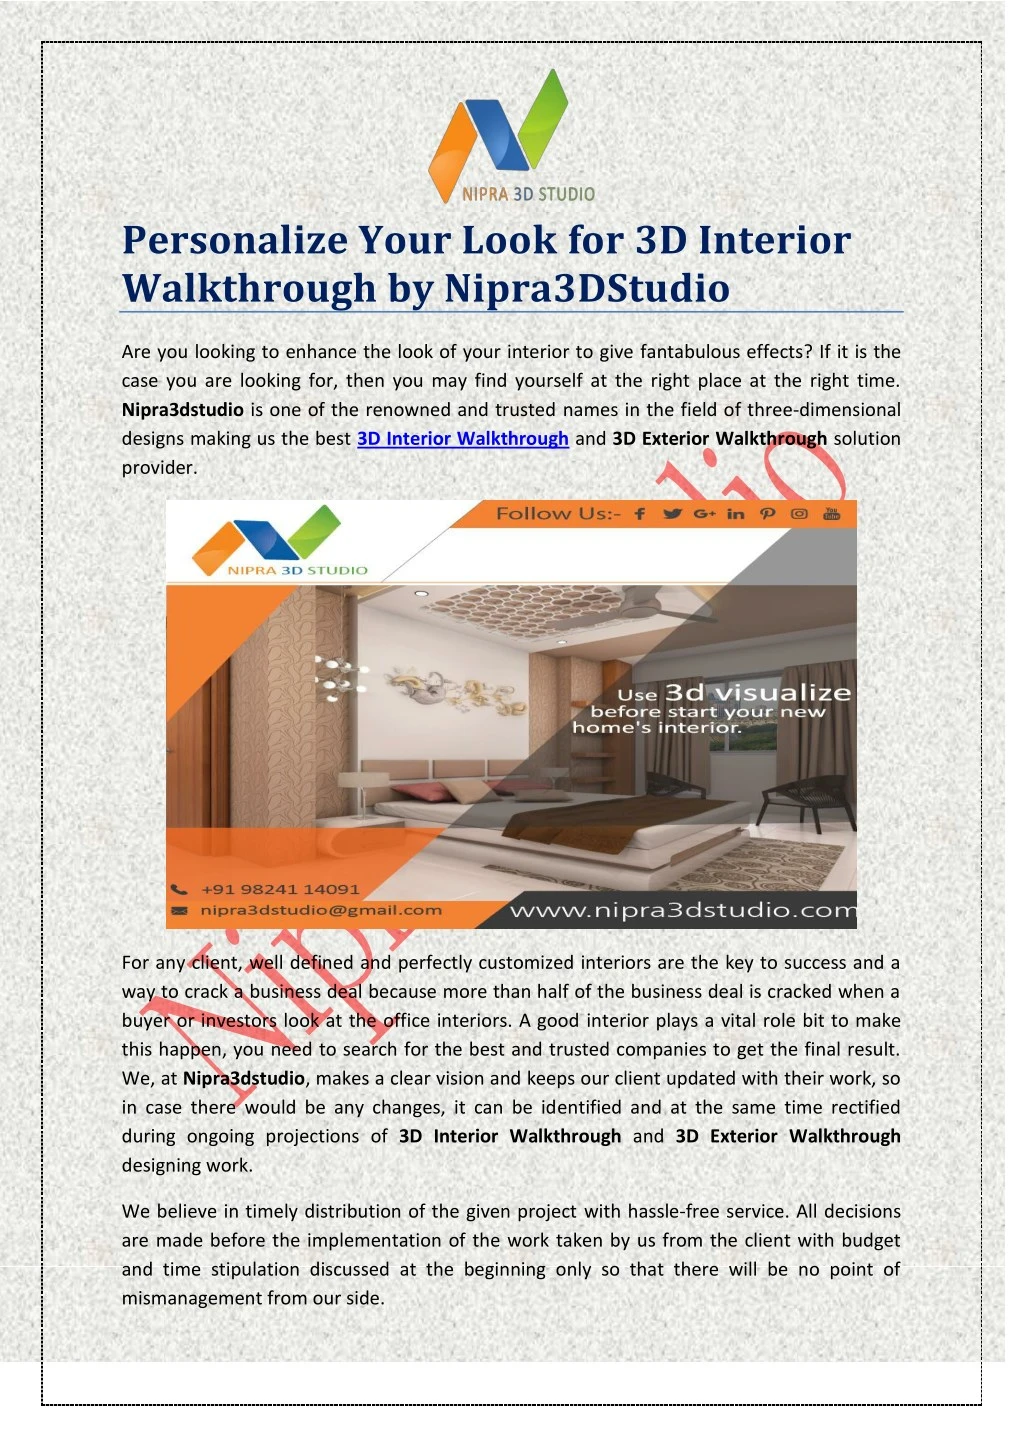 personalize your look for 3d interior walkthrough